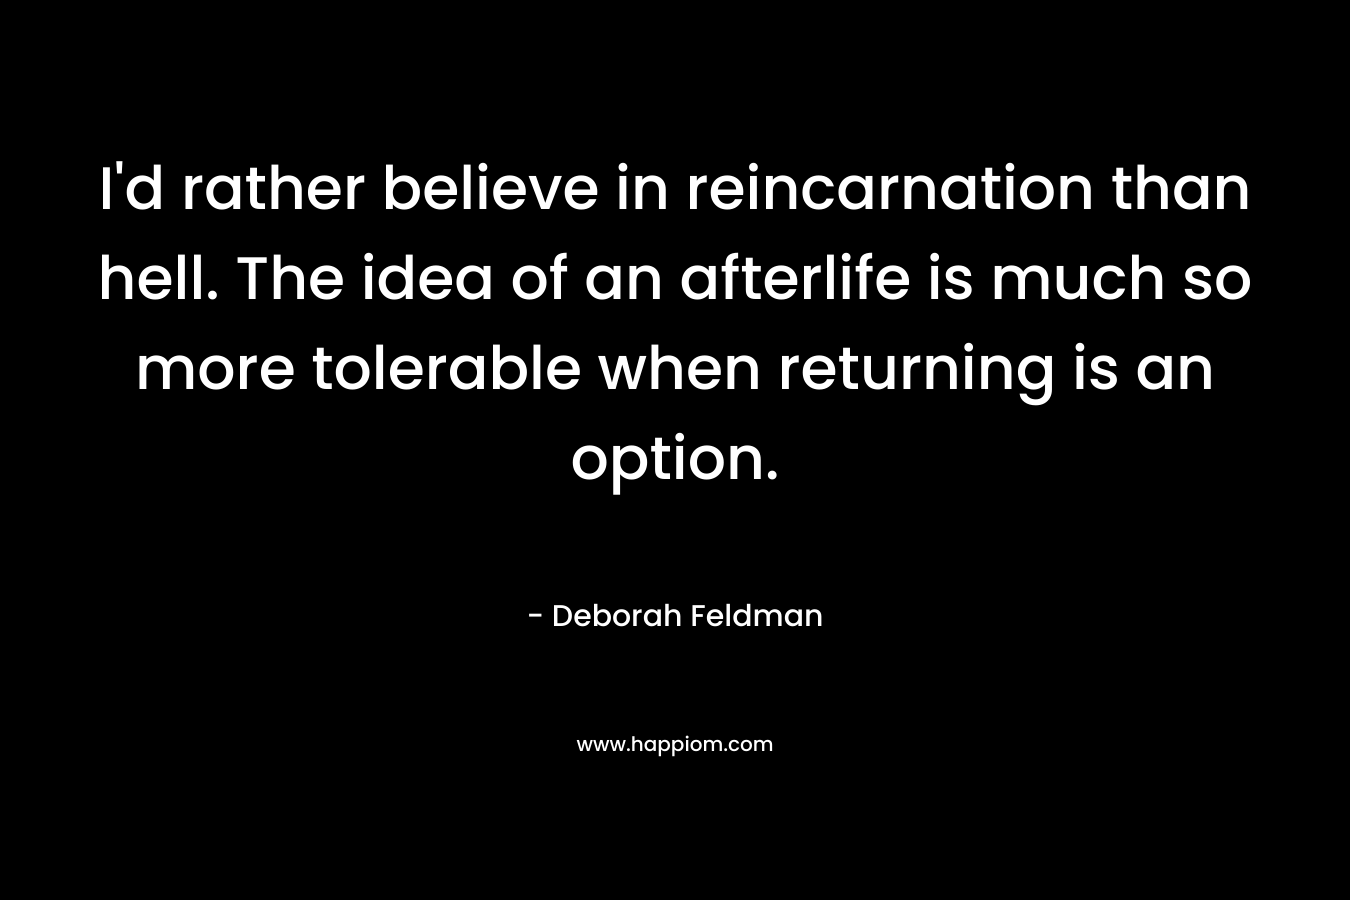 I'd rather believe in reincarnation than hell. The idea of an afterlife is much so more tolerable when returning is an option.